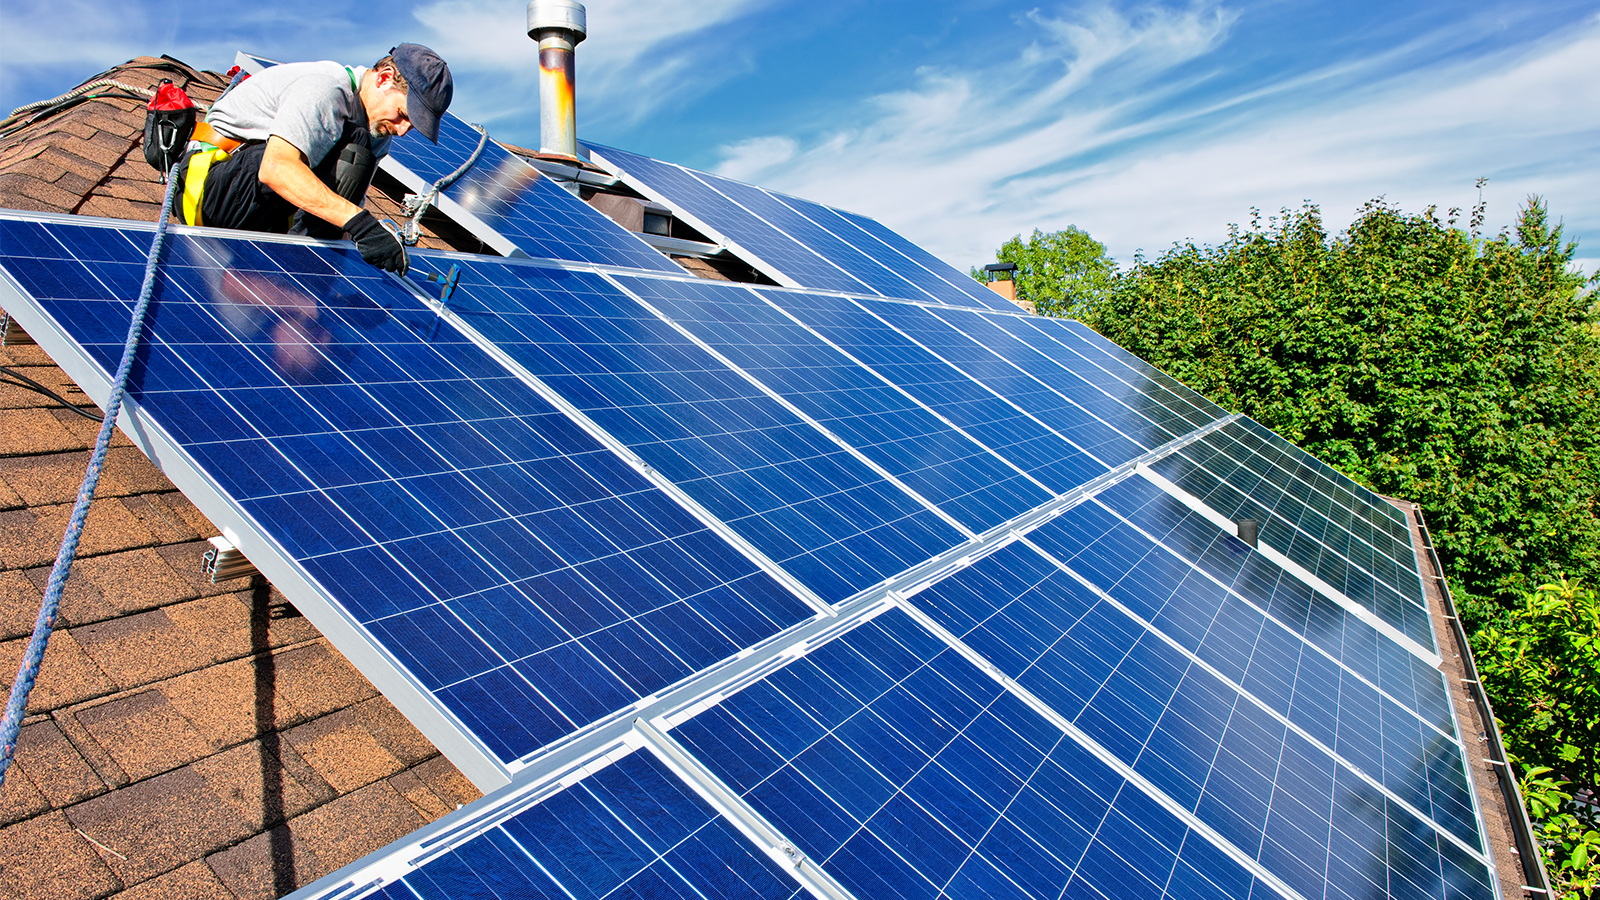 Ready to go green? Debunk solar myths to find out if installing solar panels is right for you. 